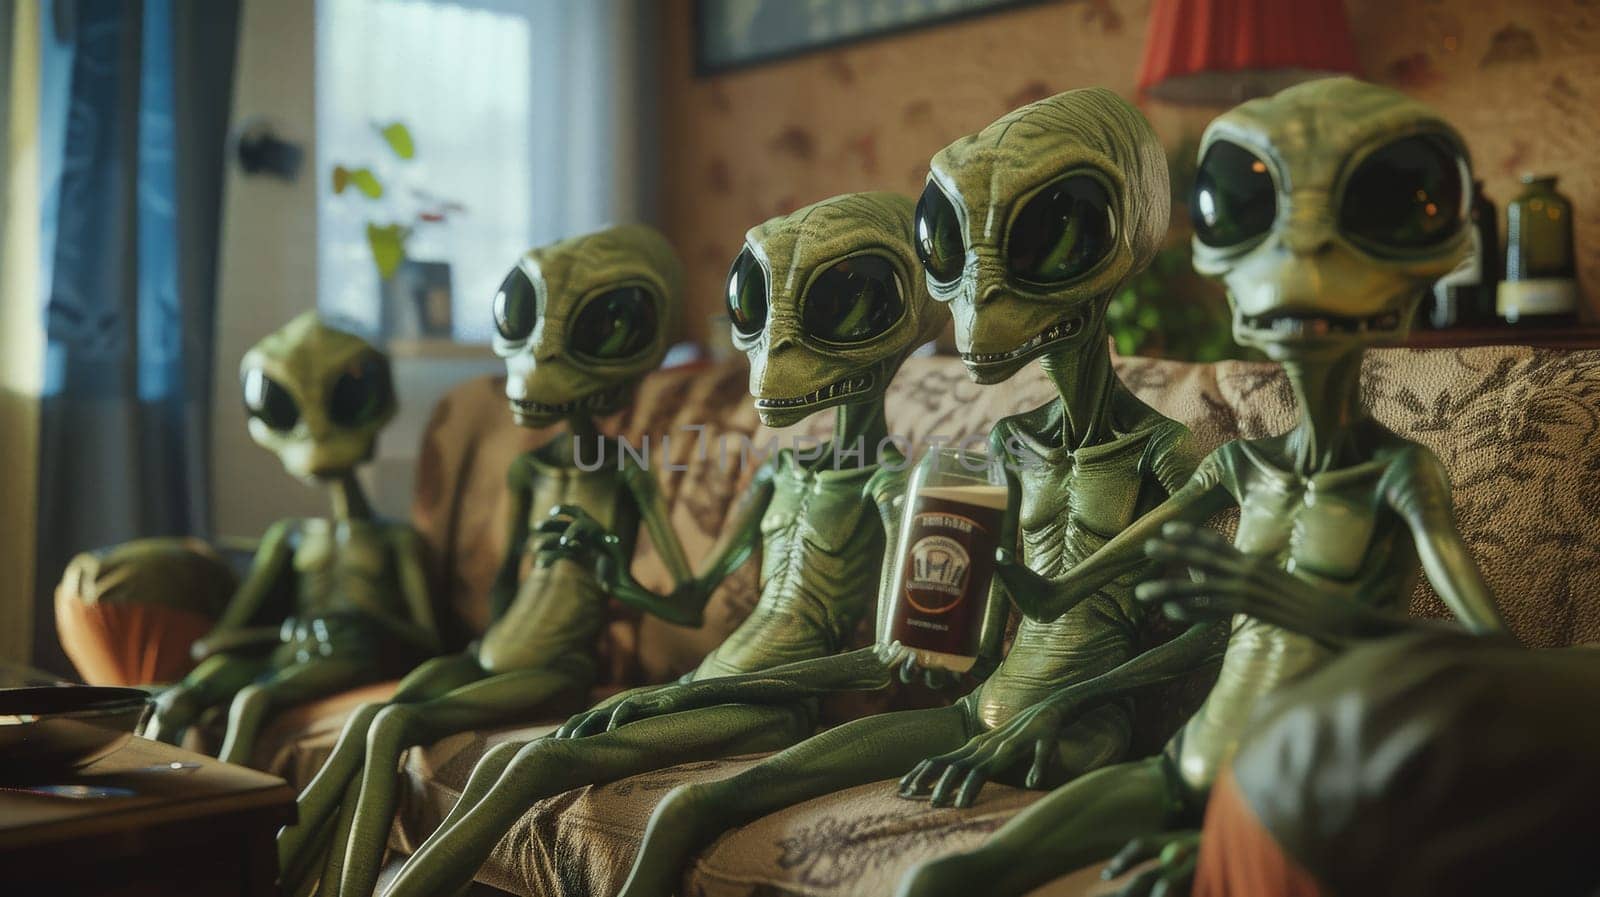 alien creatures lounging on a sofa and holding drinking, Cinematic scene.